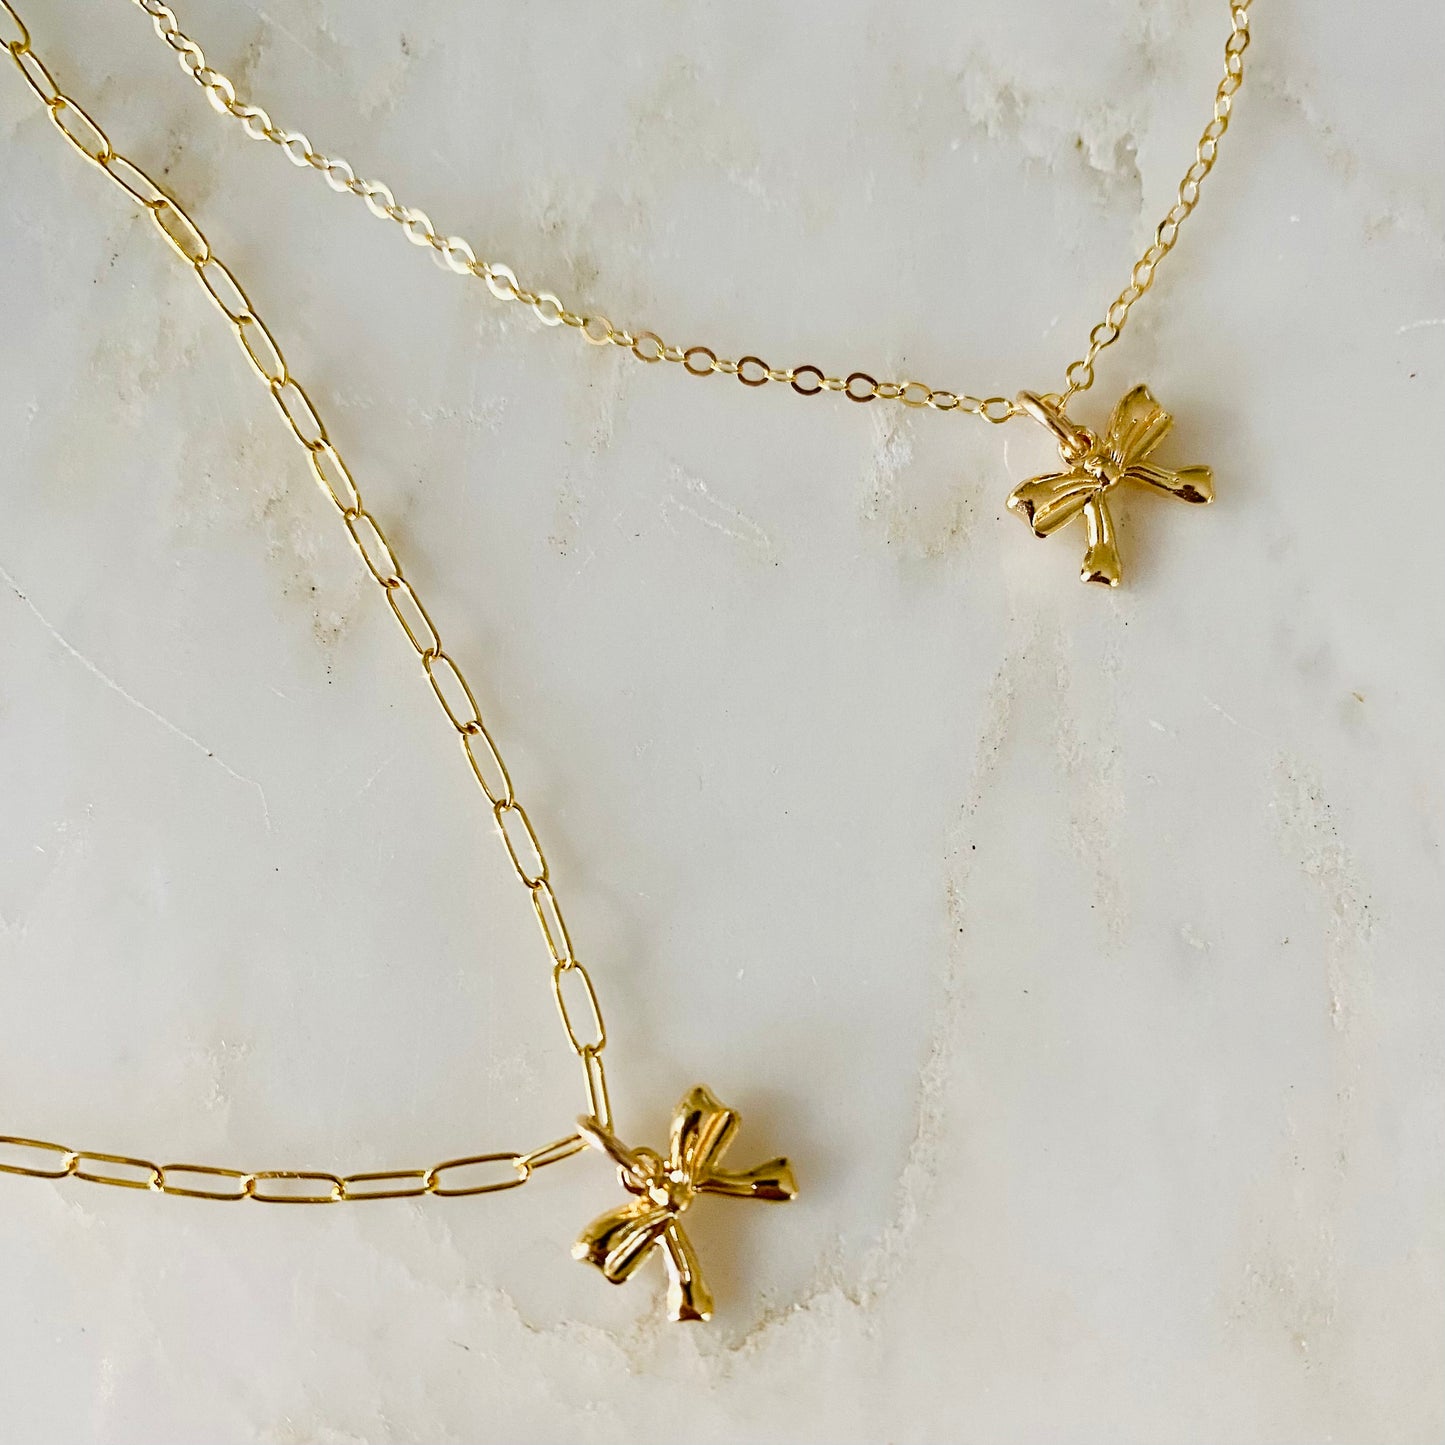 The Tiny Bow Necklace